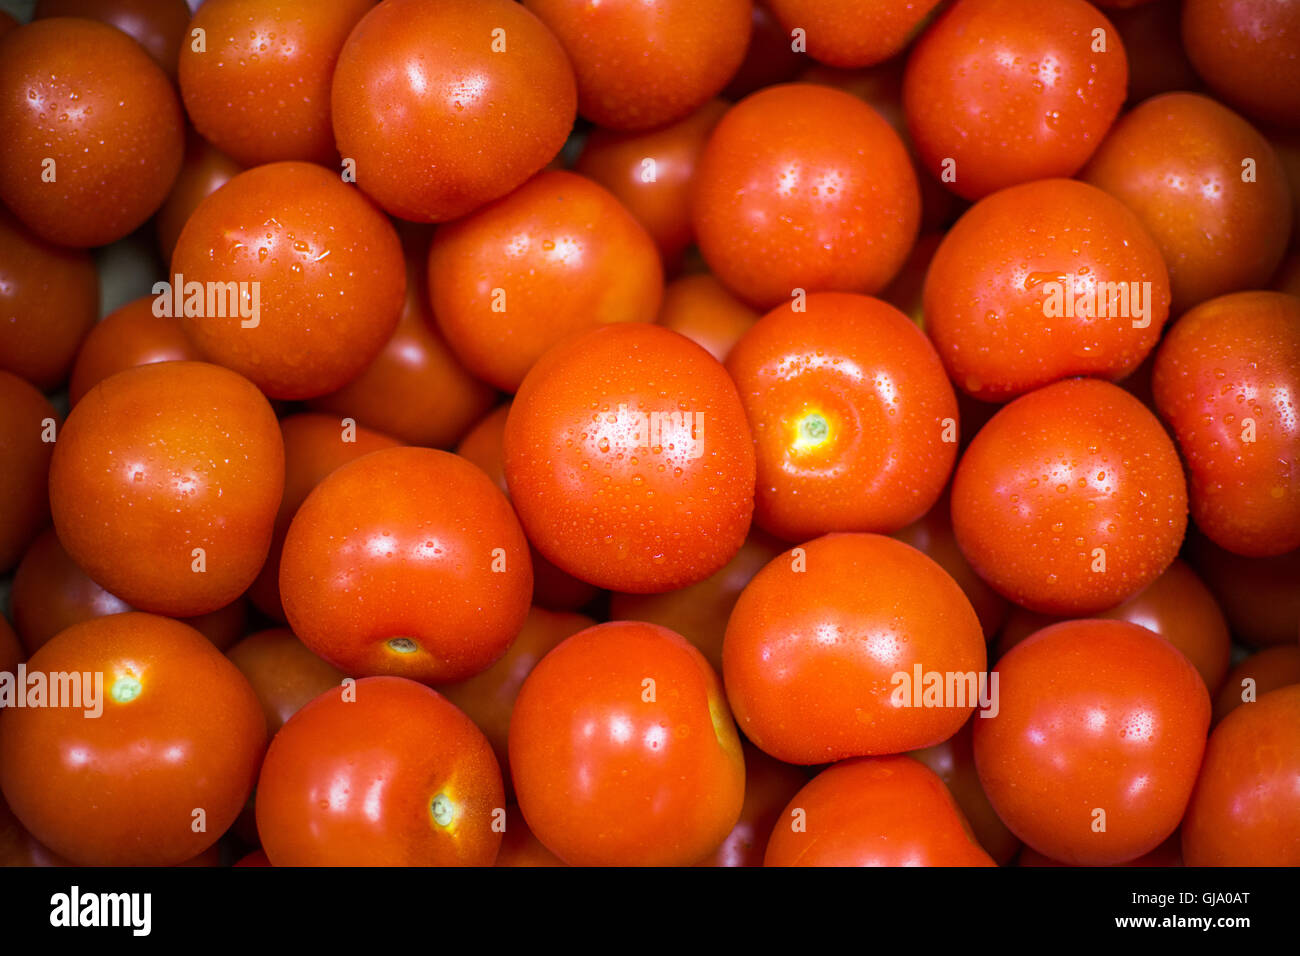 Tomatoes with water droplets. Stock Photo